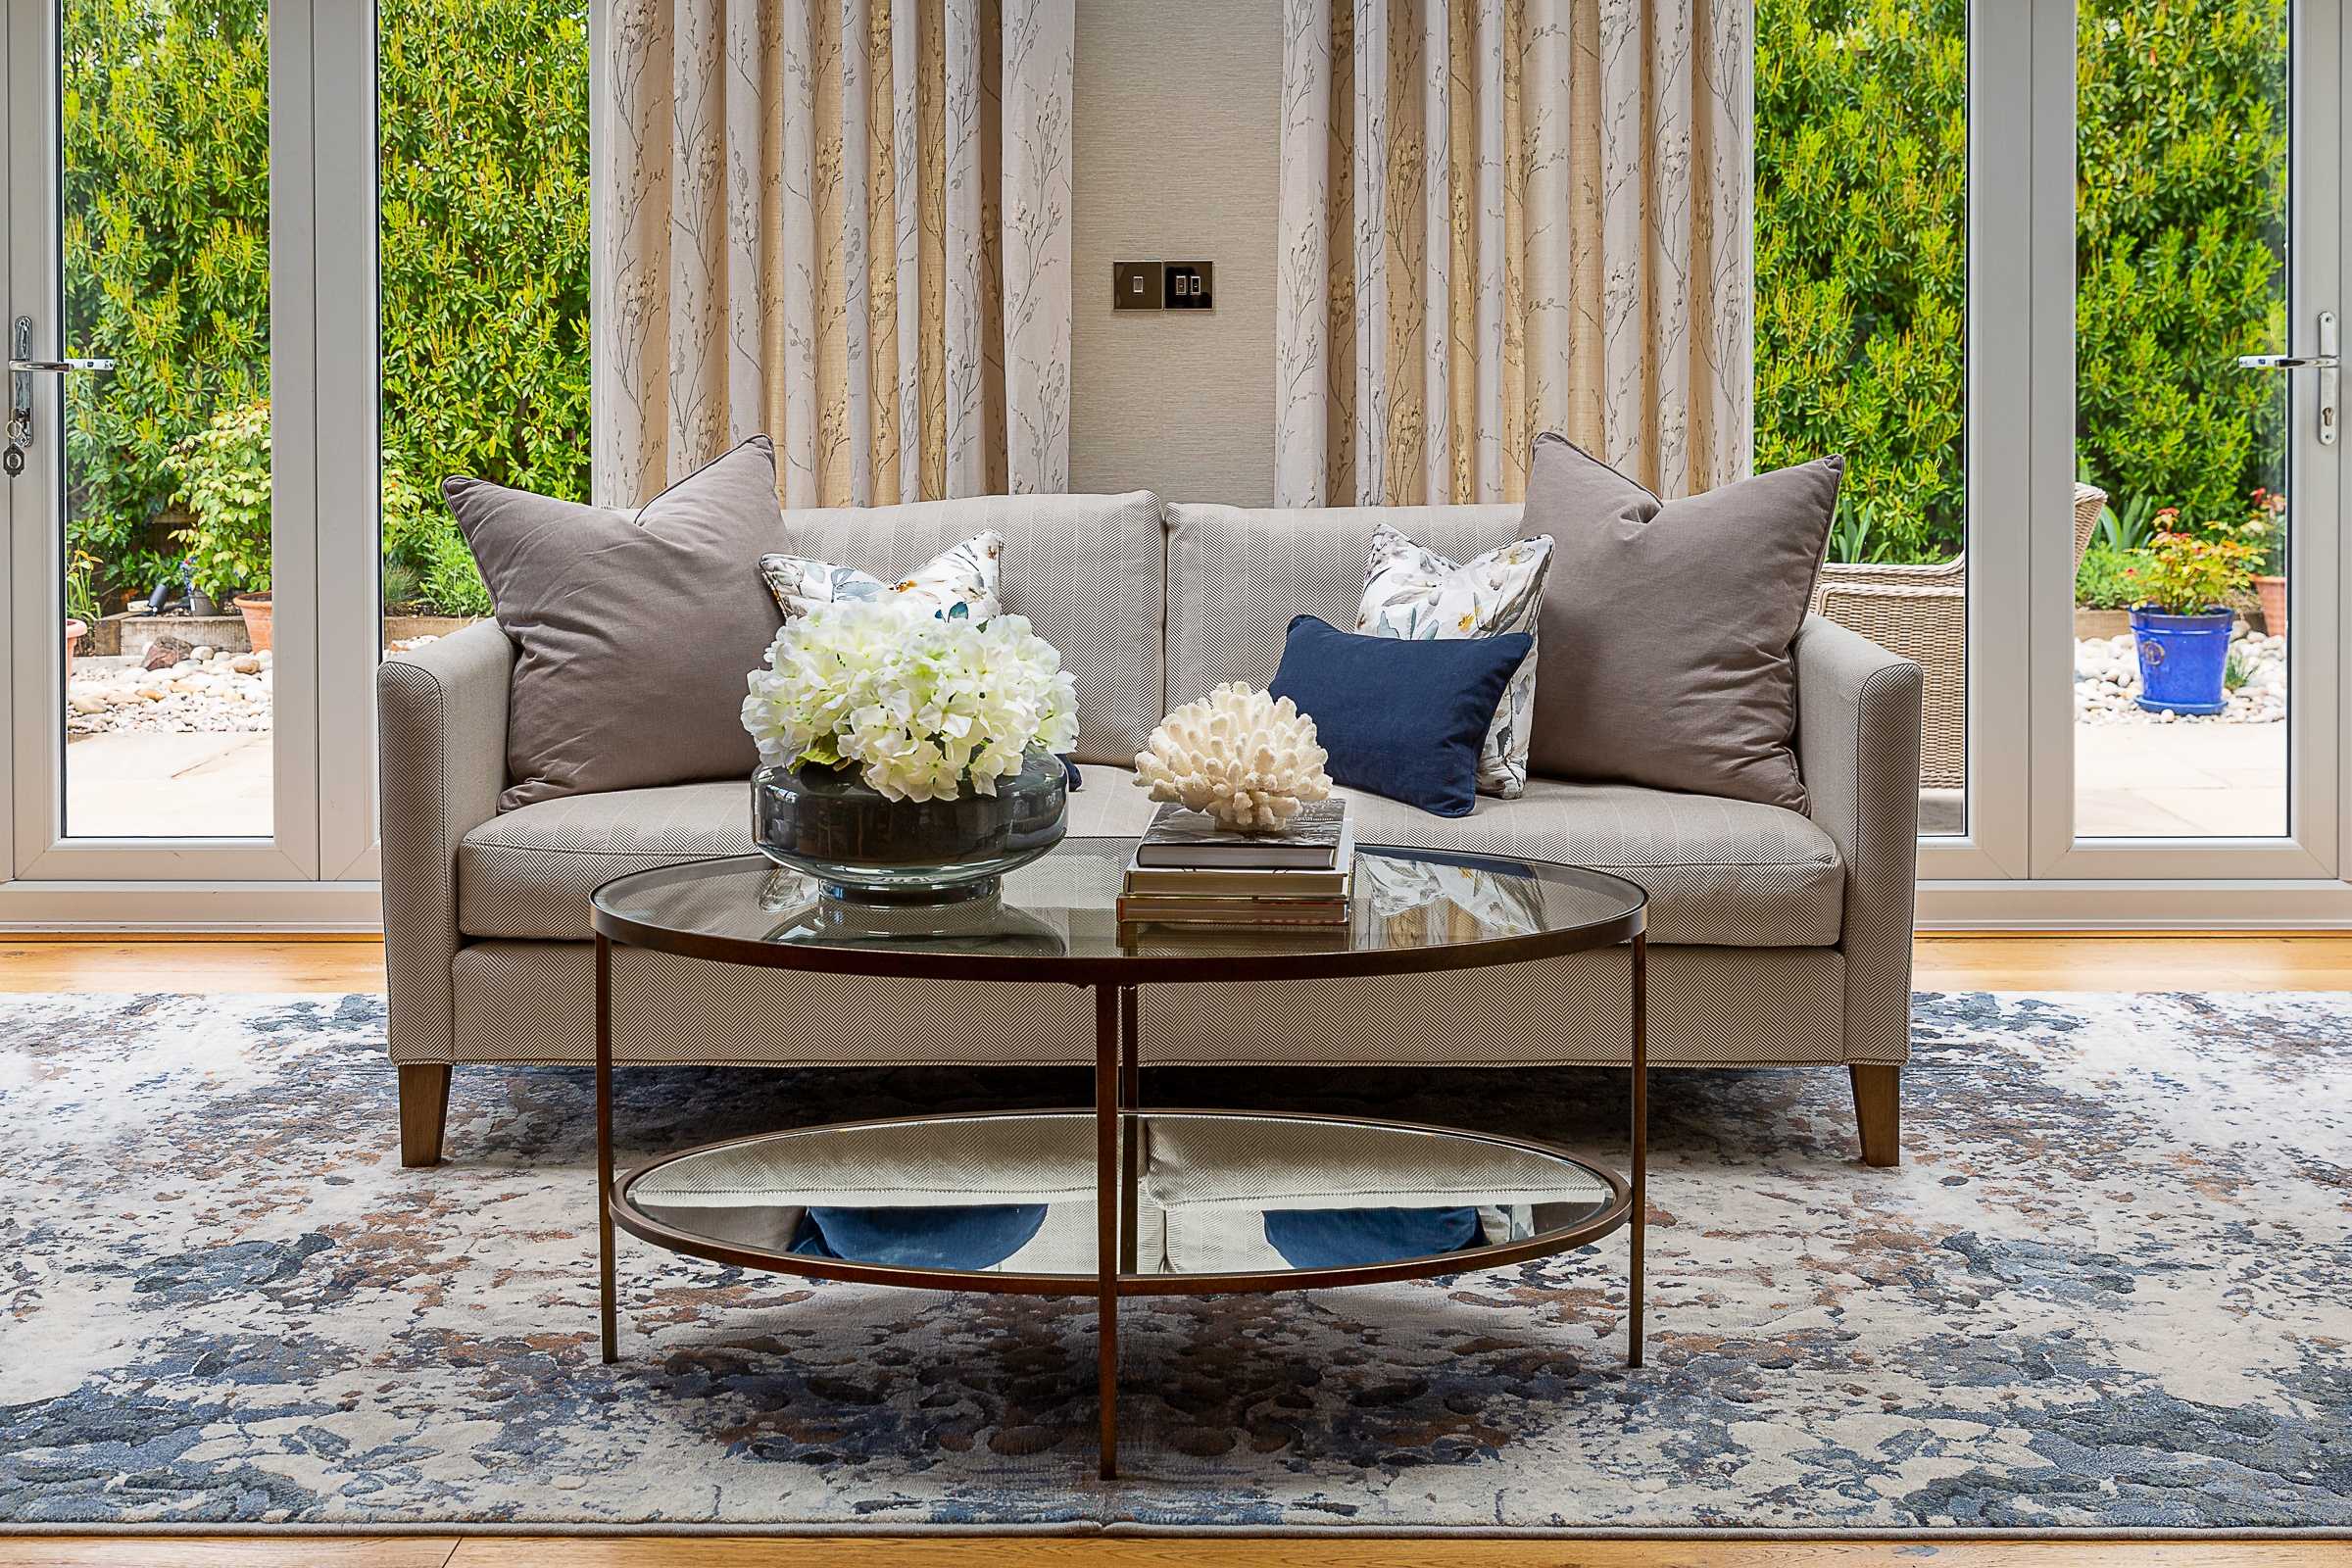 Neutral furniture with navy blue cushions